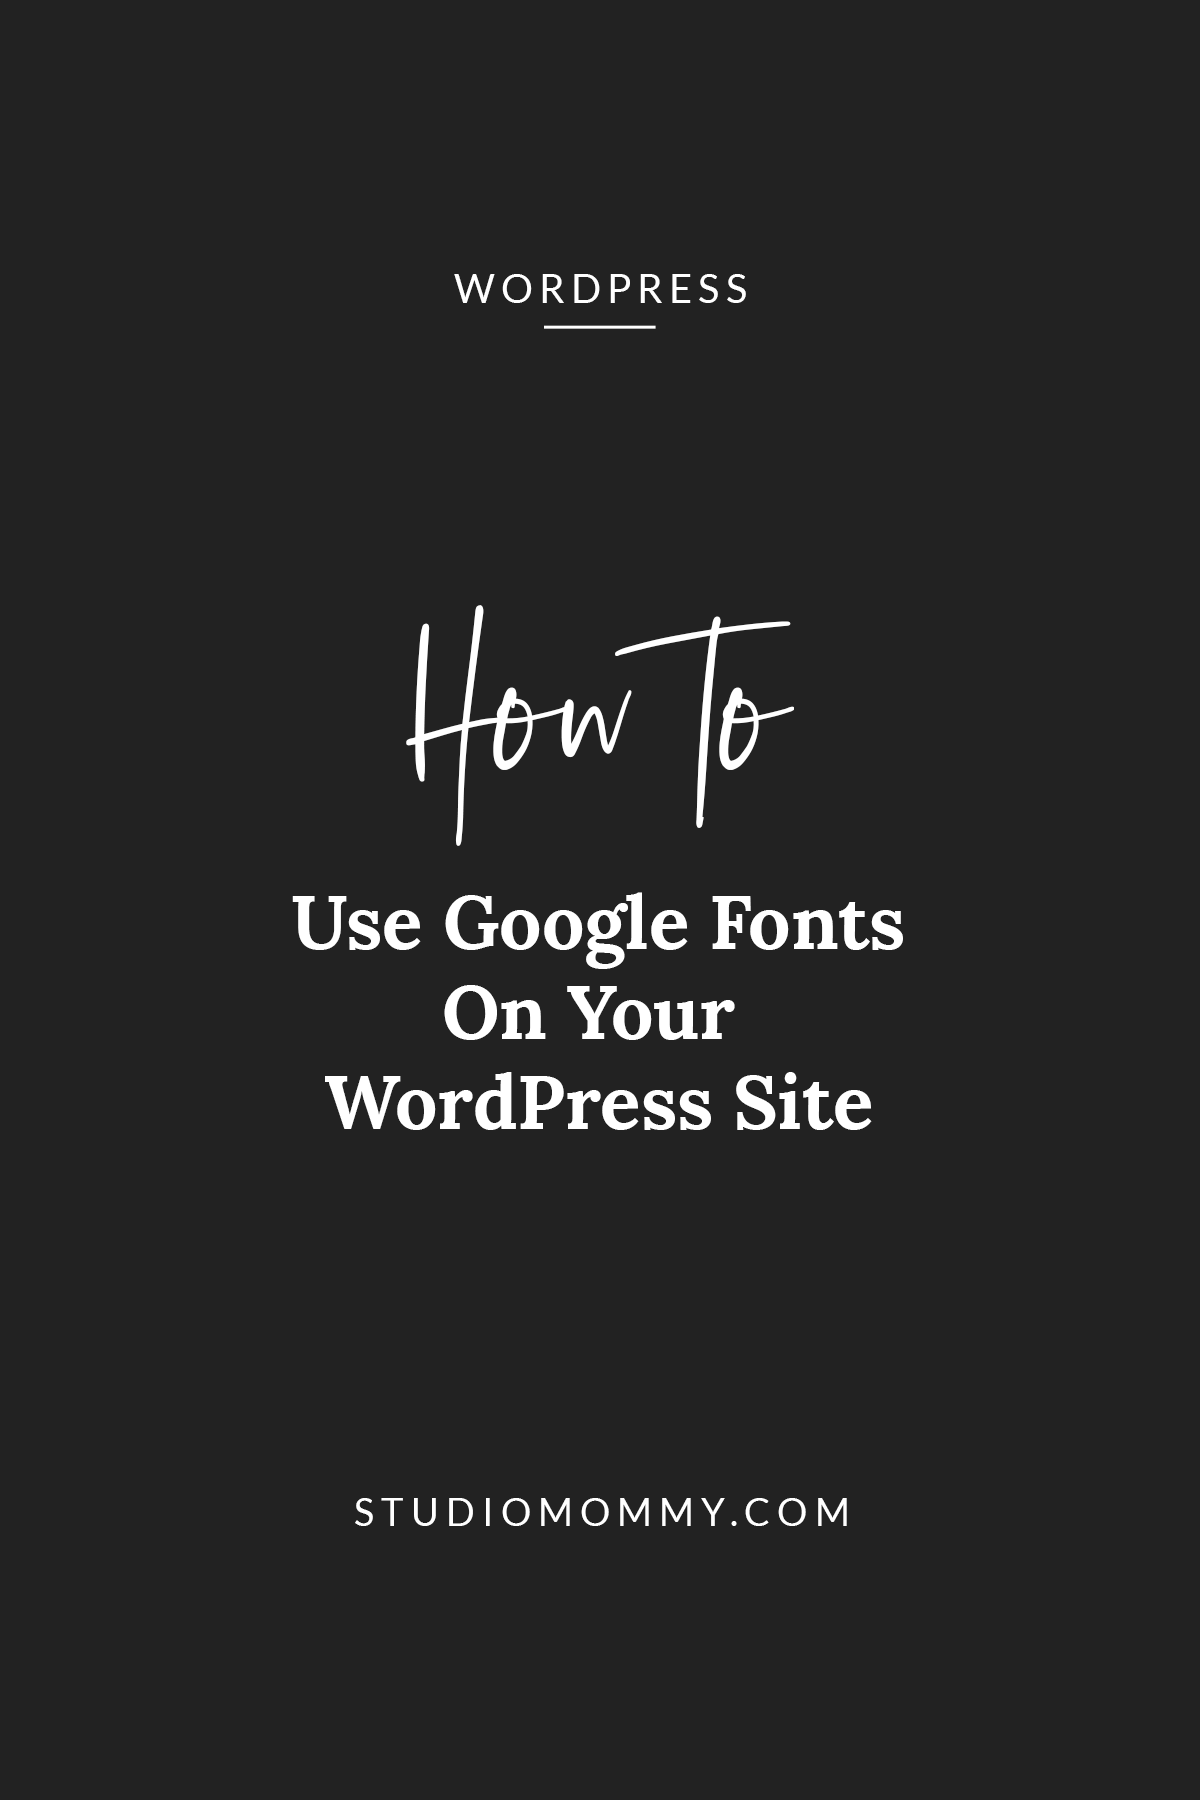 All you need, to change the google font on your WordPress theme, is a plugin. This plugin is one of the easiest plugins to use. It's the number 1 plugin I recommend to customers who would like to change the fonts on their site. There is no coding required and there are more than 800 font styles to choose from. #googlefonts #wordpresstheme #howto #wordpressblog #wordrpesswebsite #wordpressfont